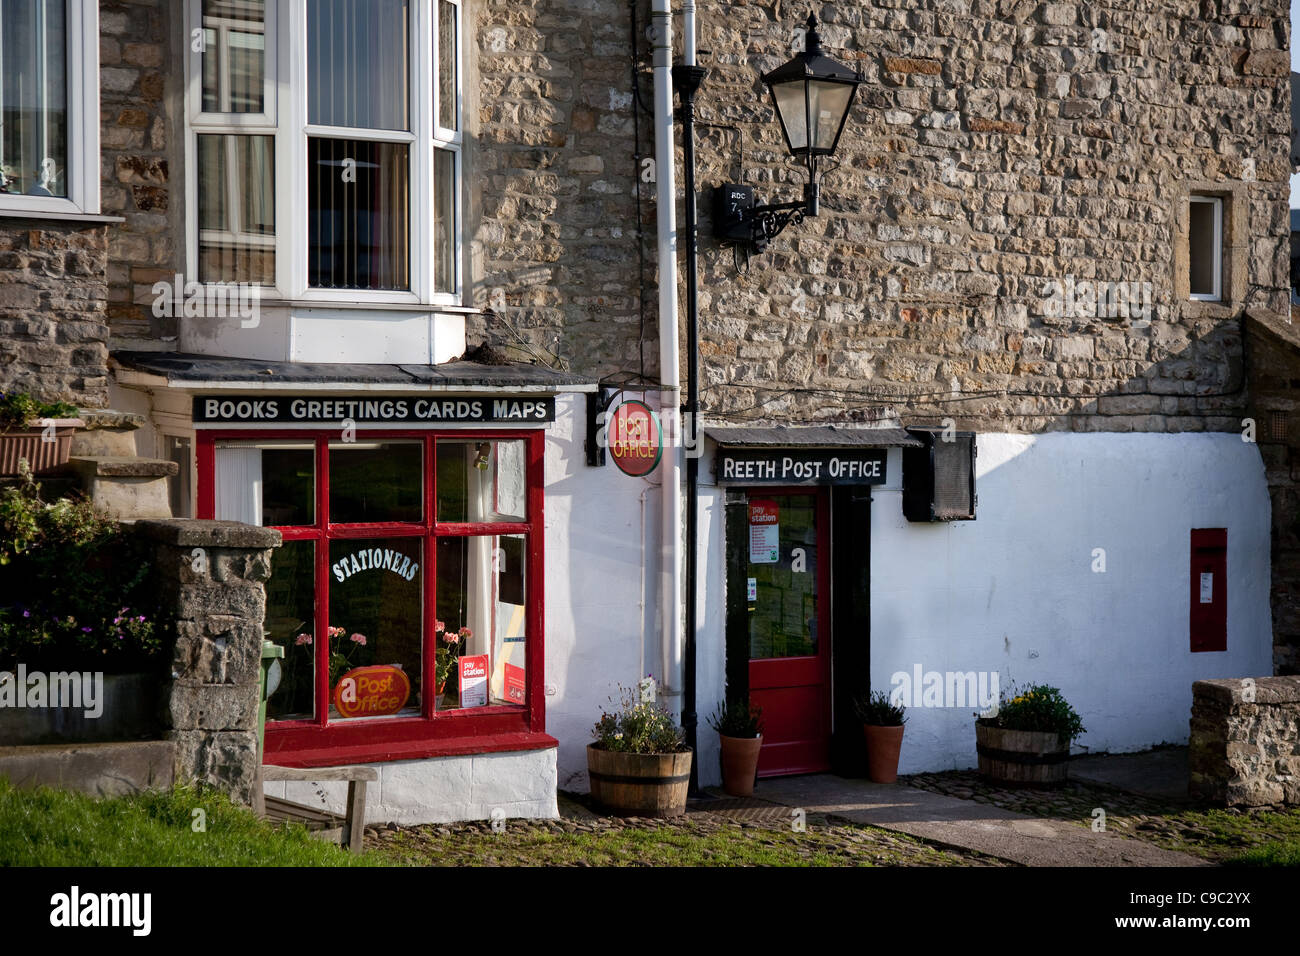 Post Office & Village Shop building in Reeth, Fremington And Healaugh, North Yorkshire, England Stock Photo